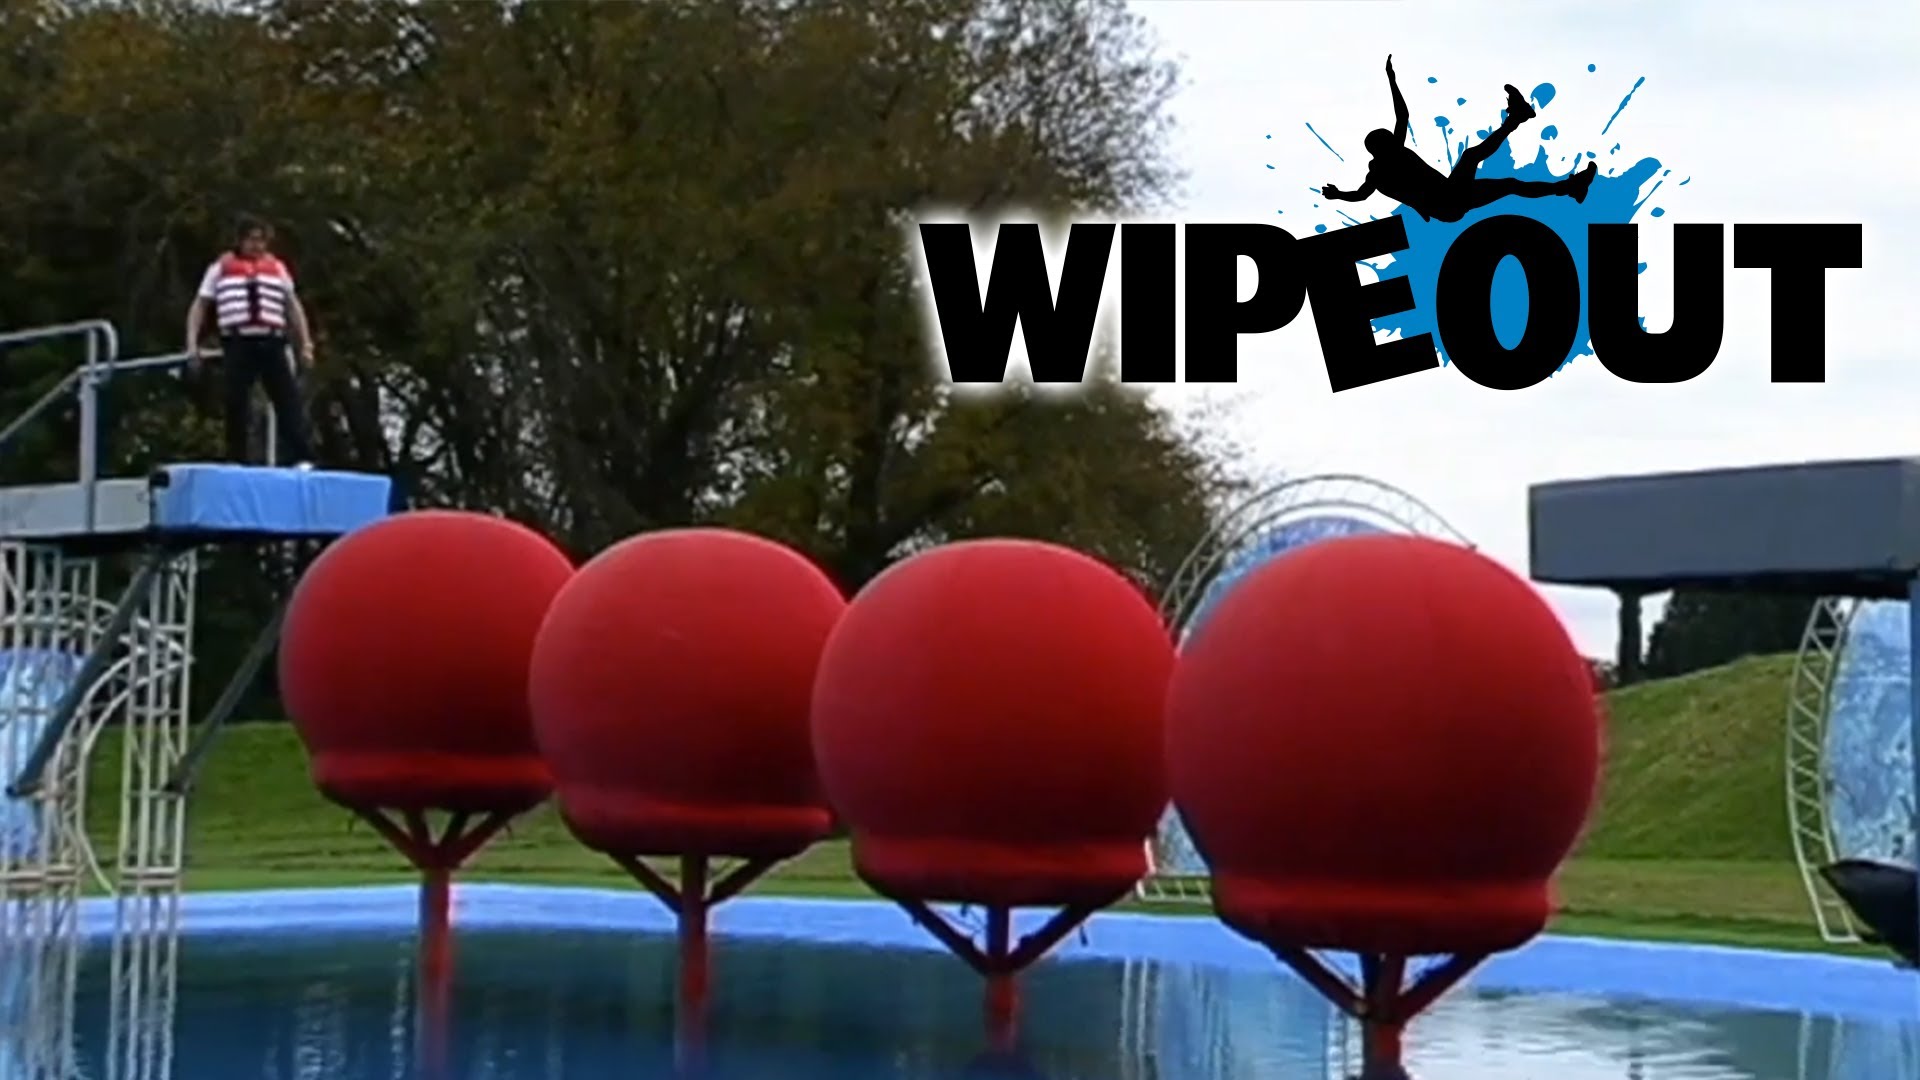 Wipeout #26